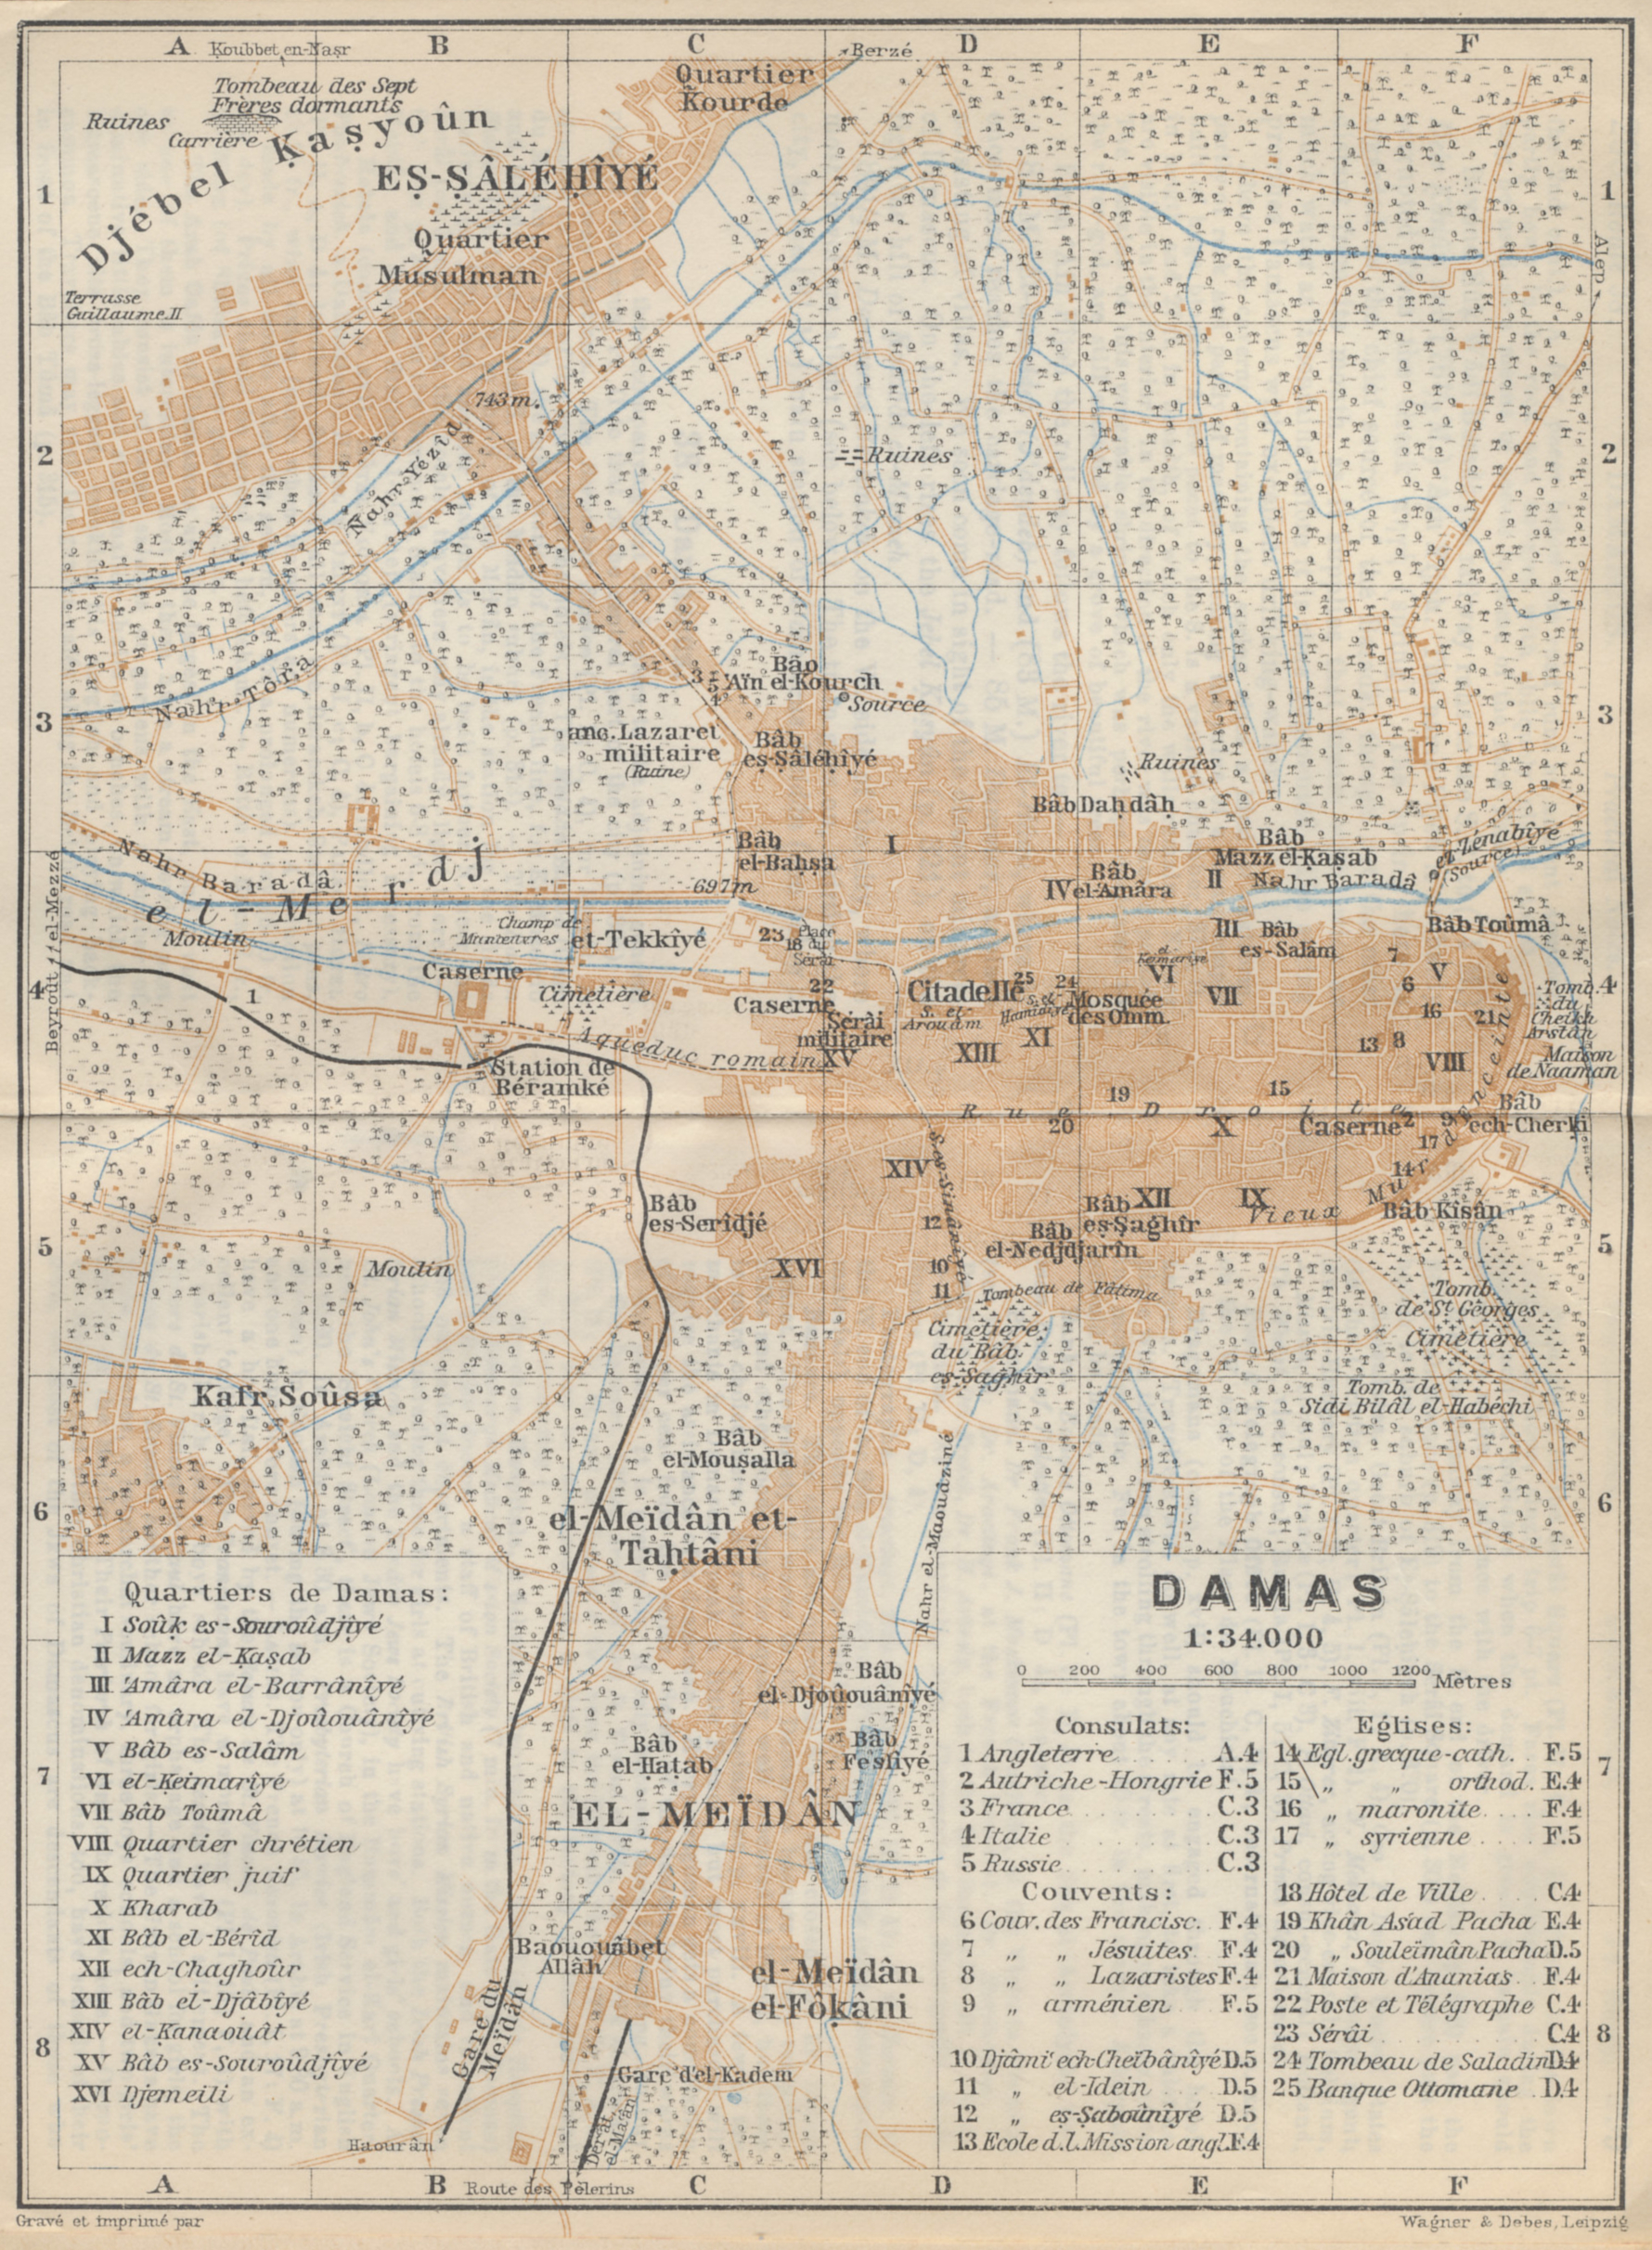 Map of Damascus from 'Palestine and Syria with Routes through Mesopotamia and Babylonia and with the Island of Cyprus' by Karl Baedeker.